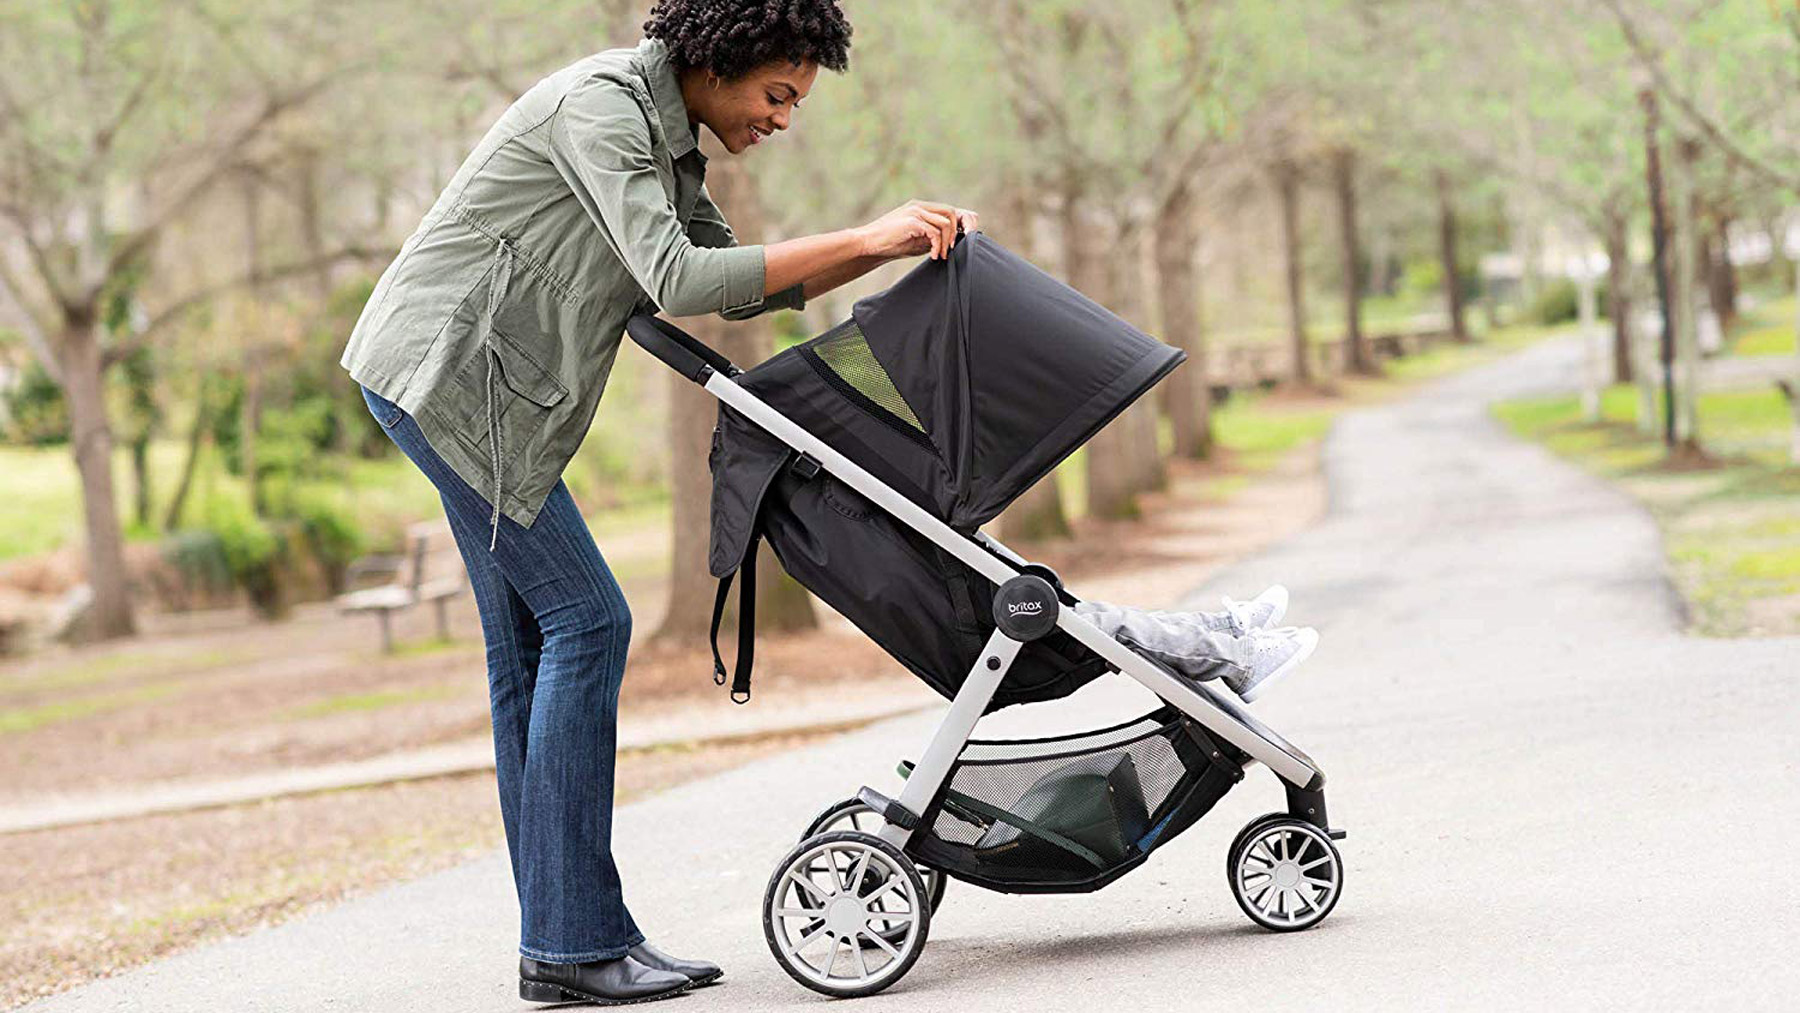 Accessories You Should Buy Along With Your Stroller